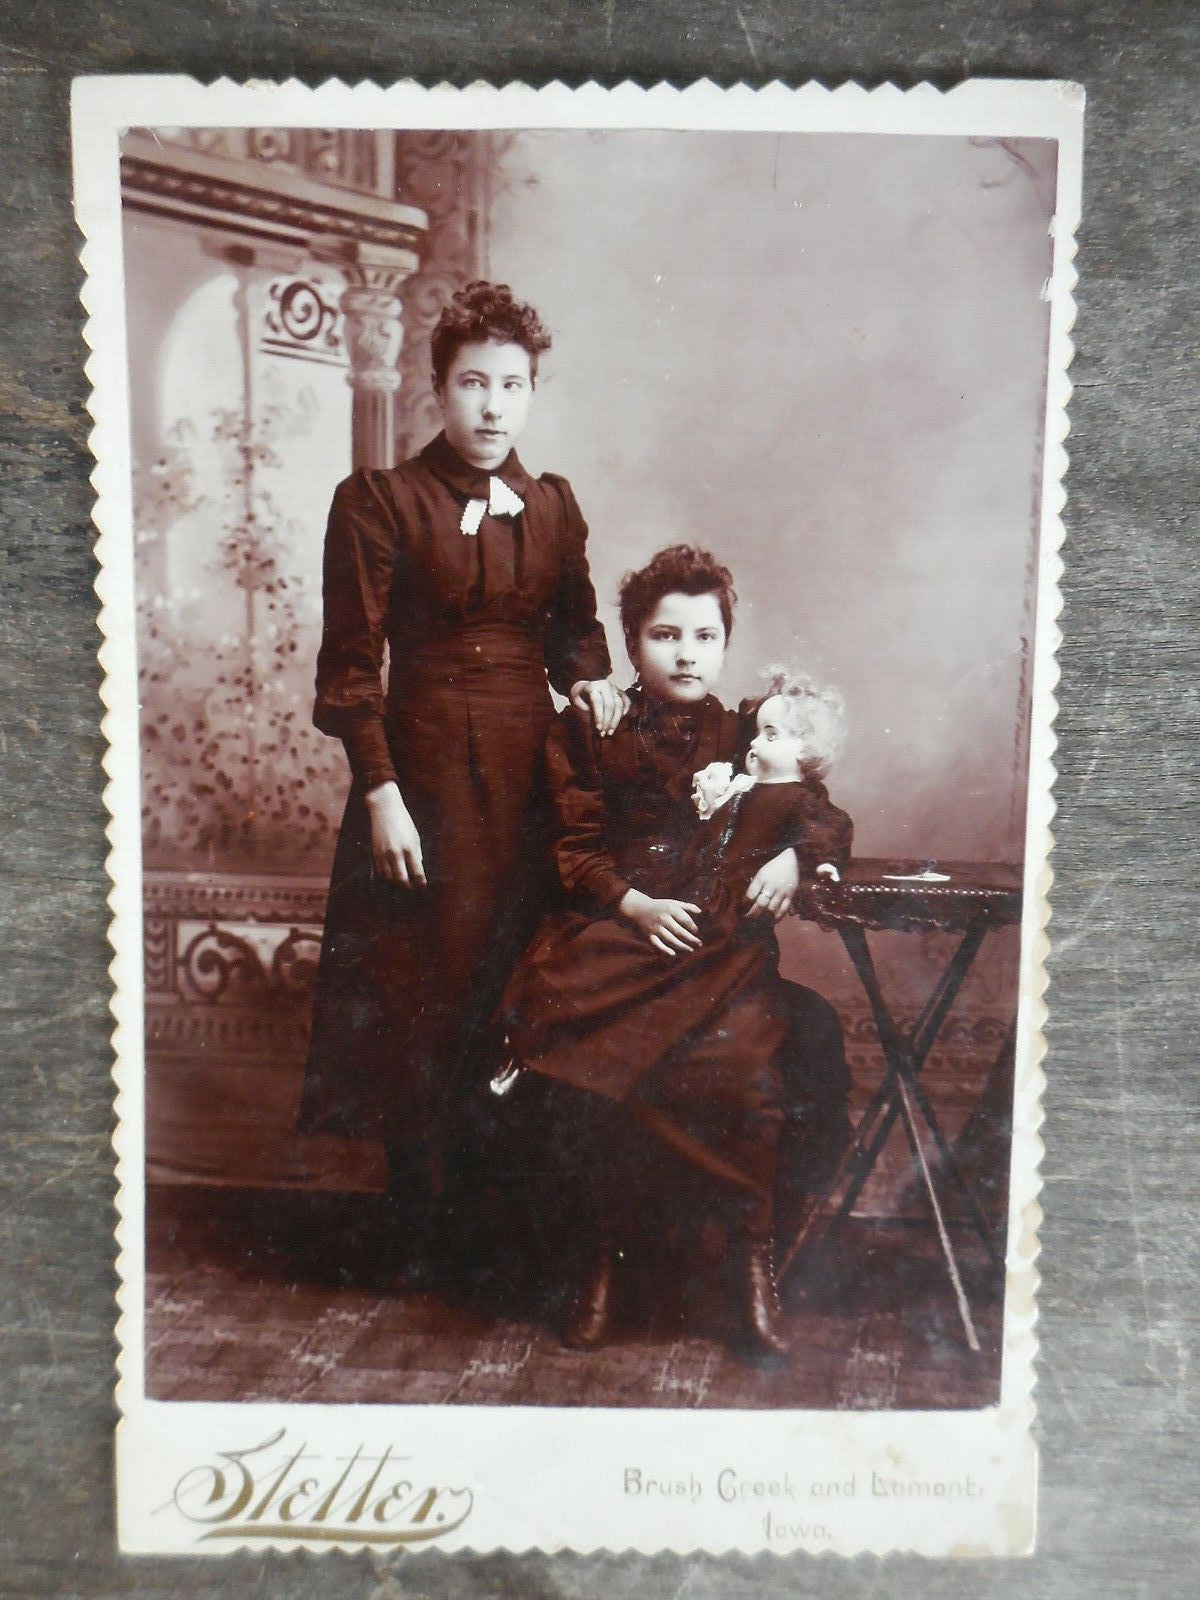 Stetter Cabinet Card Photo Girl & Large Bisque Doll Brush Creek & Lamont Iowa